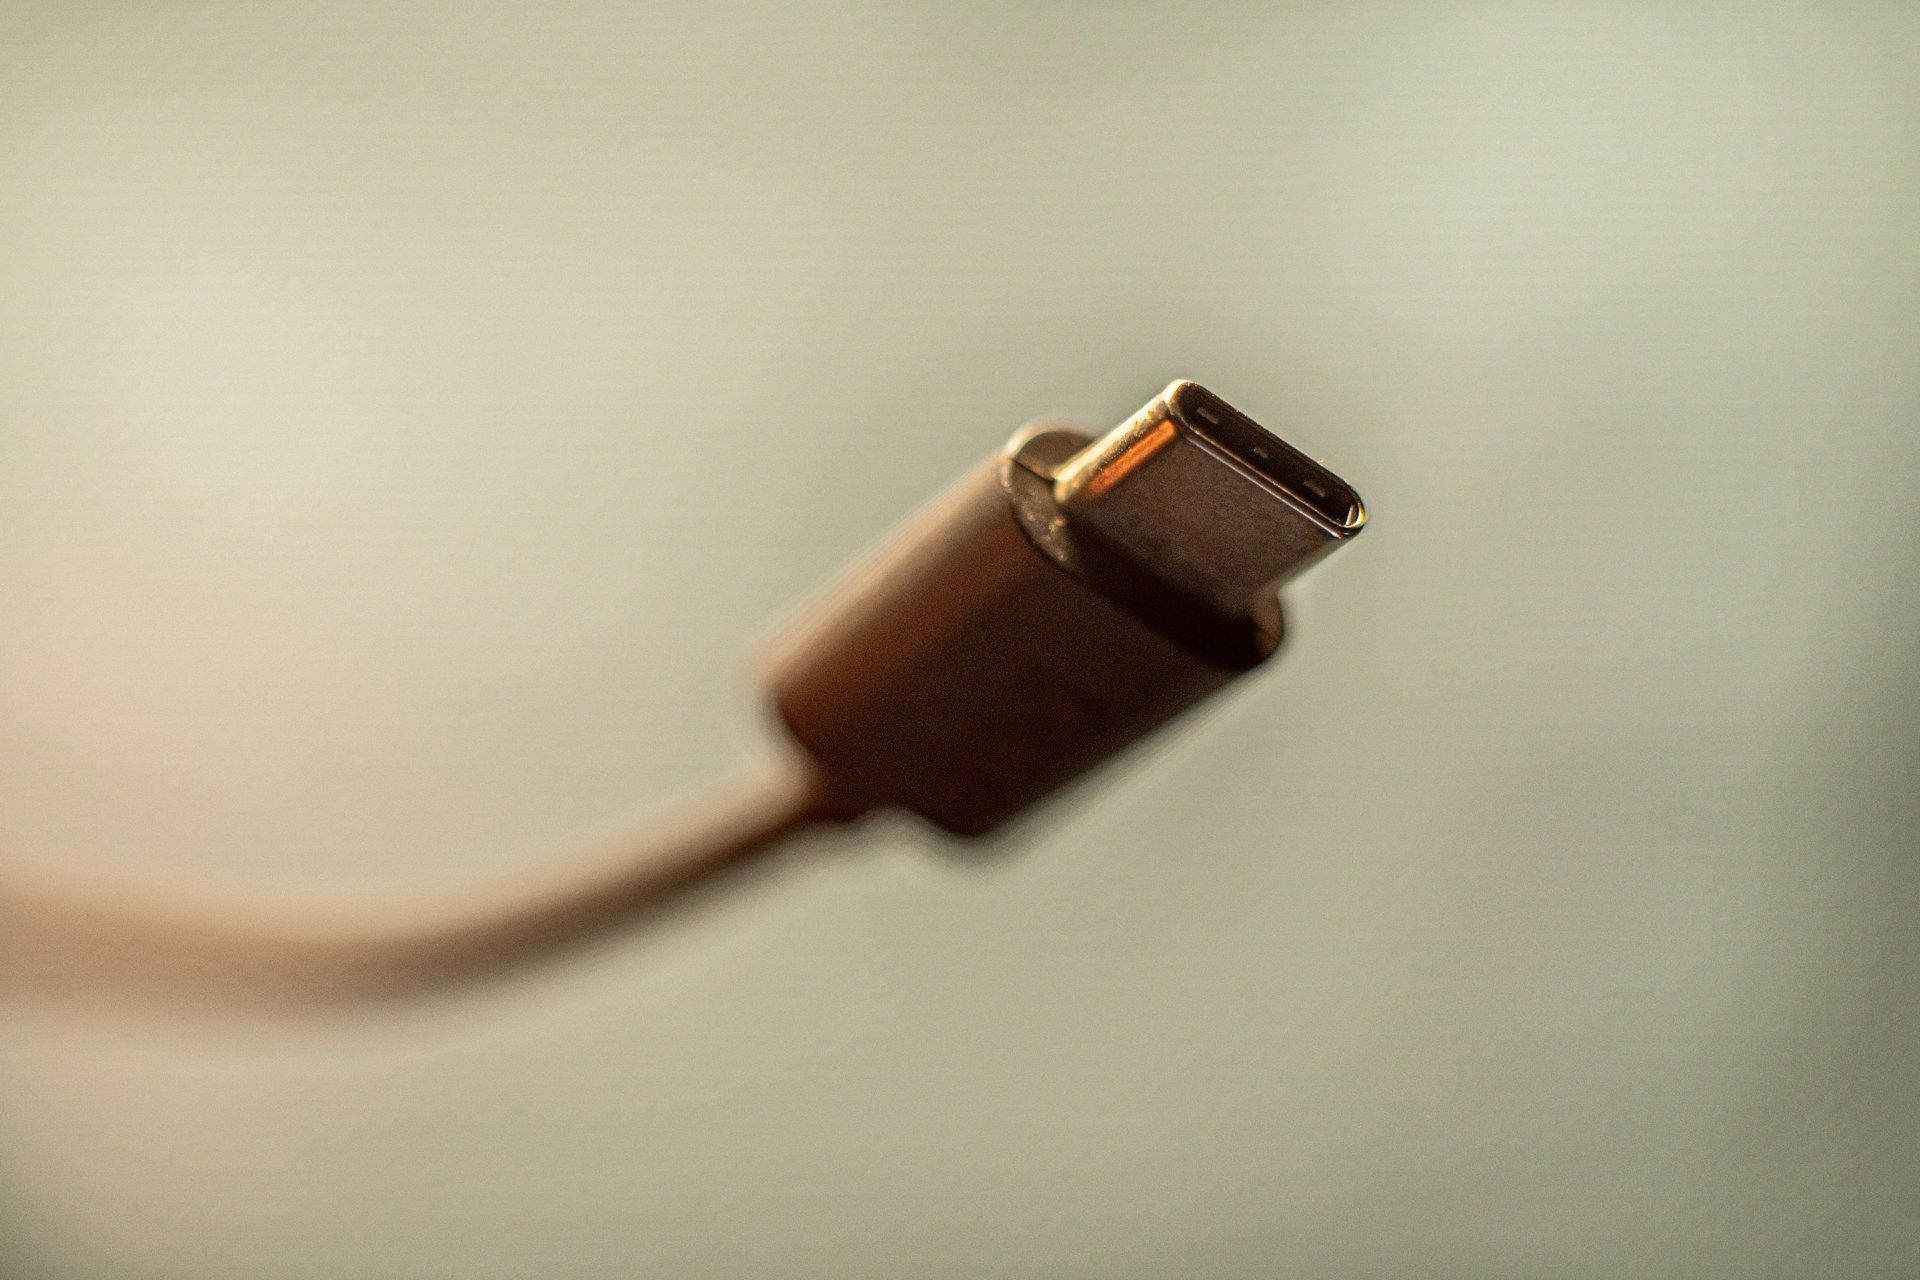 USB-C is more versatile and present in almost all Android devices. (Image via Unsplash/ Marcus Urbenz)